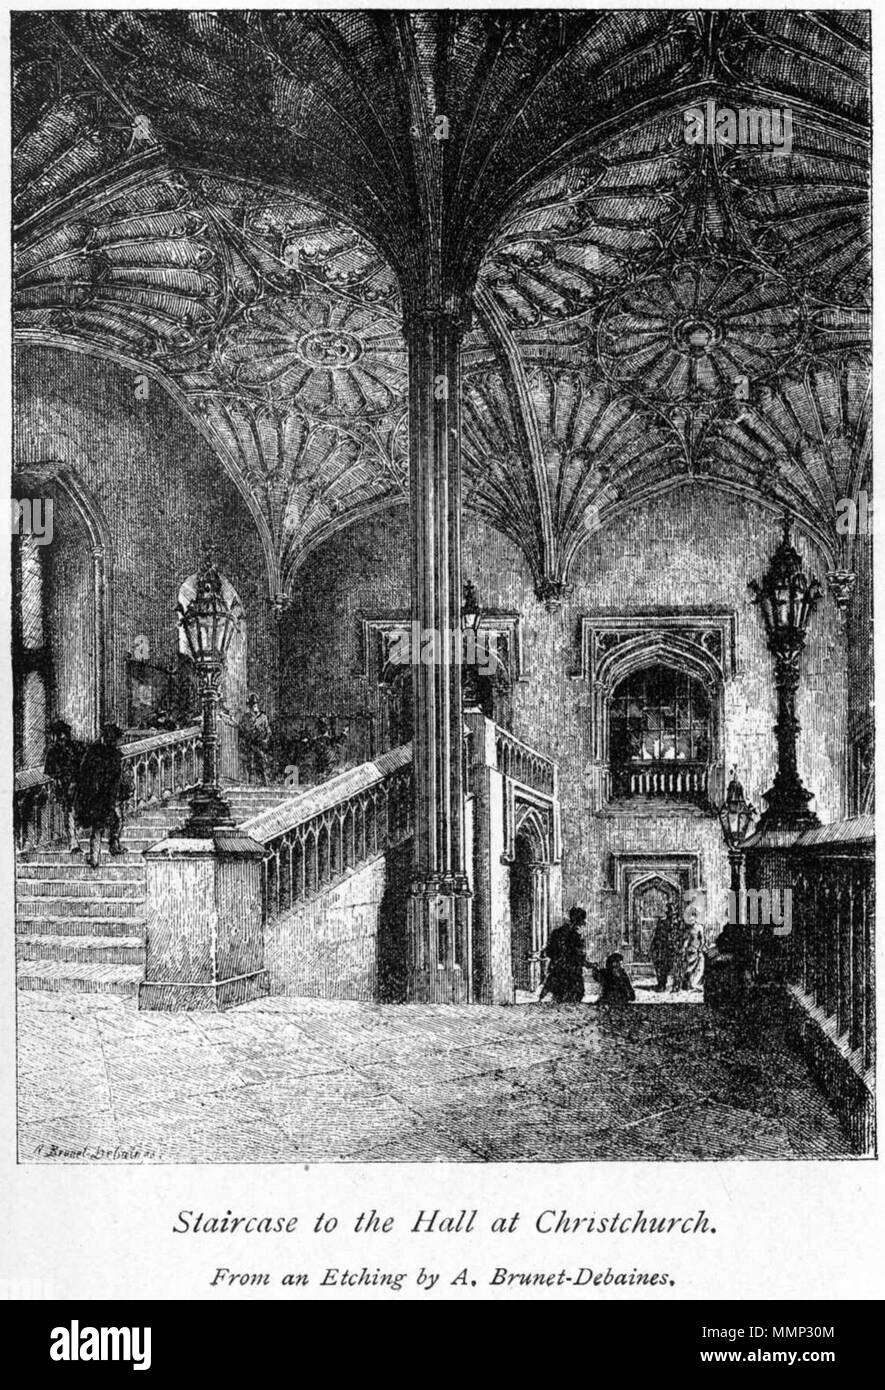 . English: Staircase to the hall at Christchurch - Oxford: Brief Historical and Descriptive Notes by Andrew Lang, M.A., sometime Fellow of Merton College, Oxford [1844 – 1912]; sixth edition, Seely & Co. Ltd., London, 1896.  . 1896. Alfred-Louis Brunet-Debaines (1845-1939) 38 Alfred-Louis Brunet-Debaines06 Stock Photo